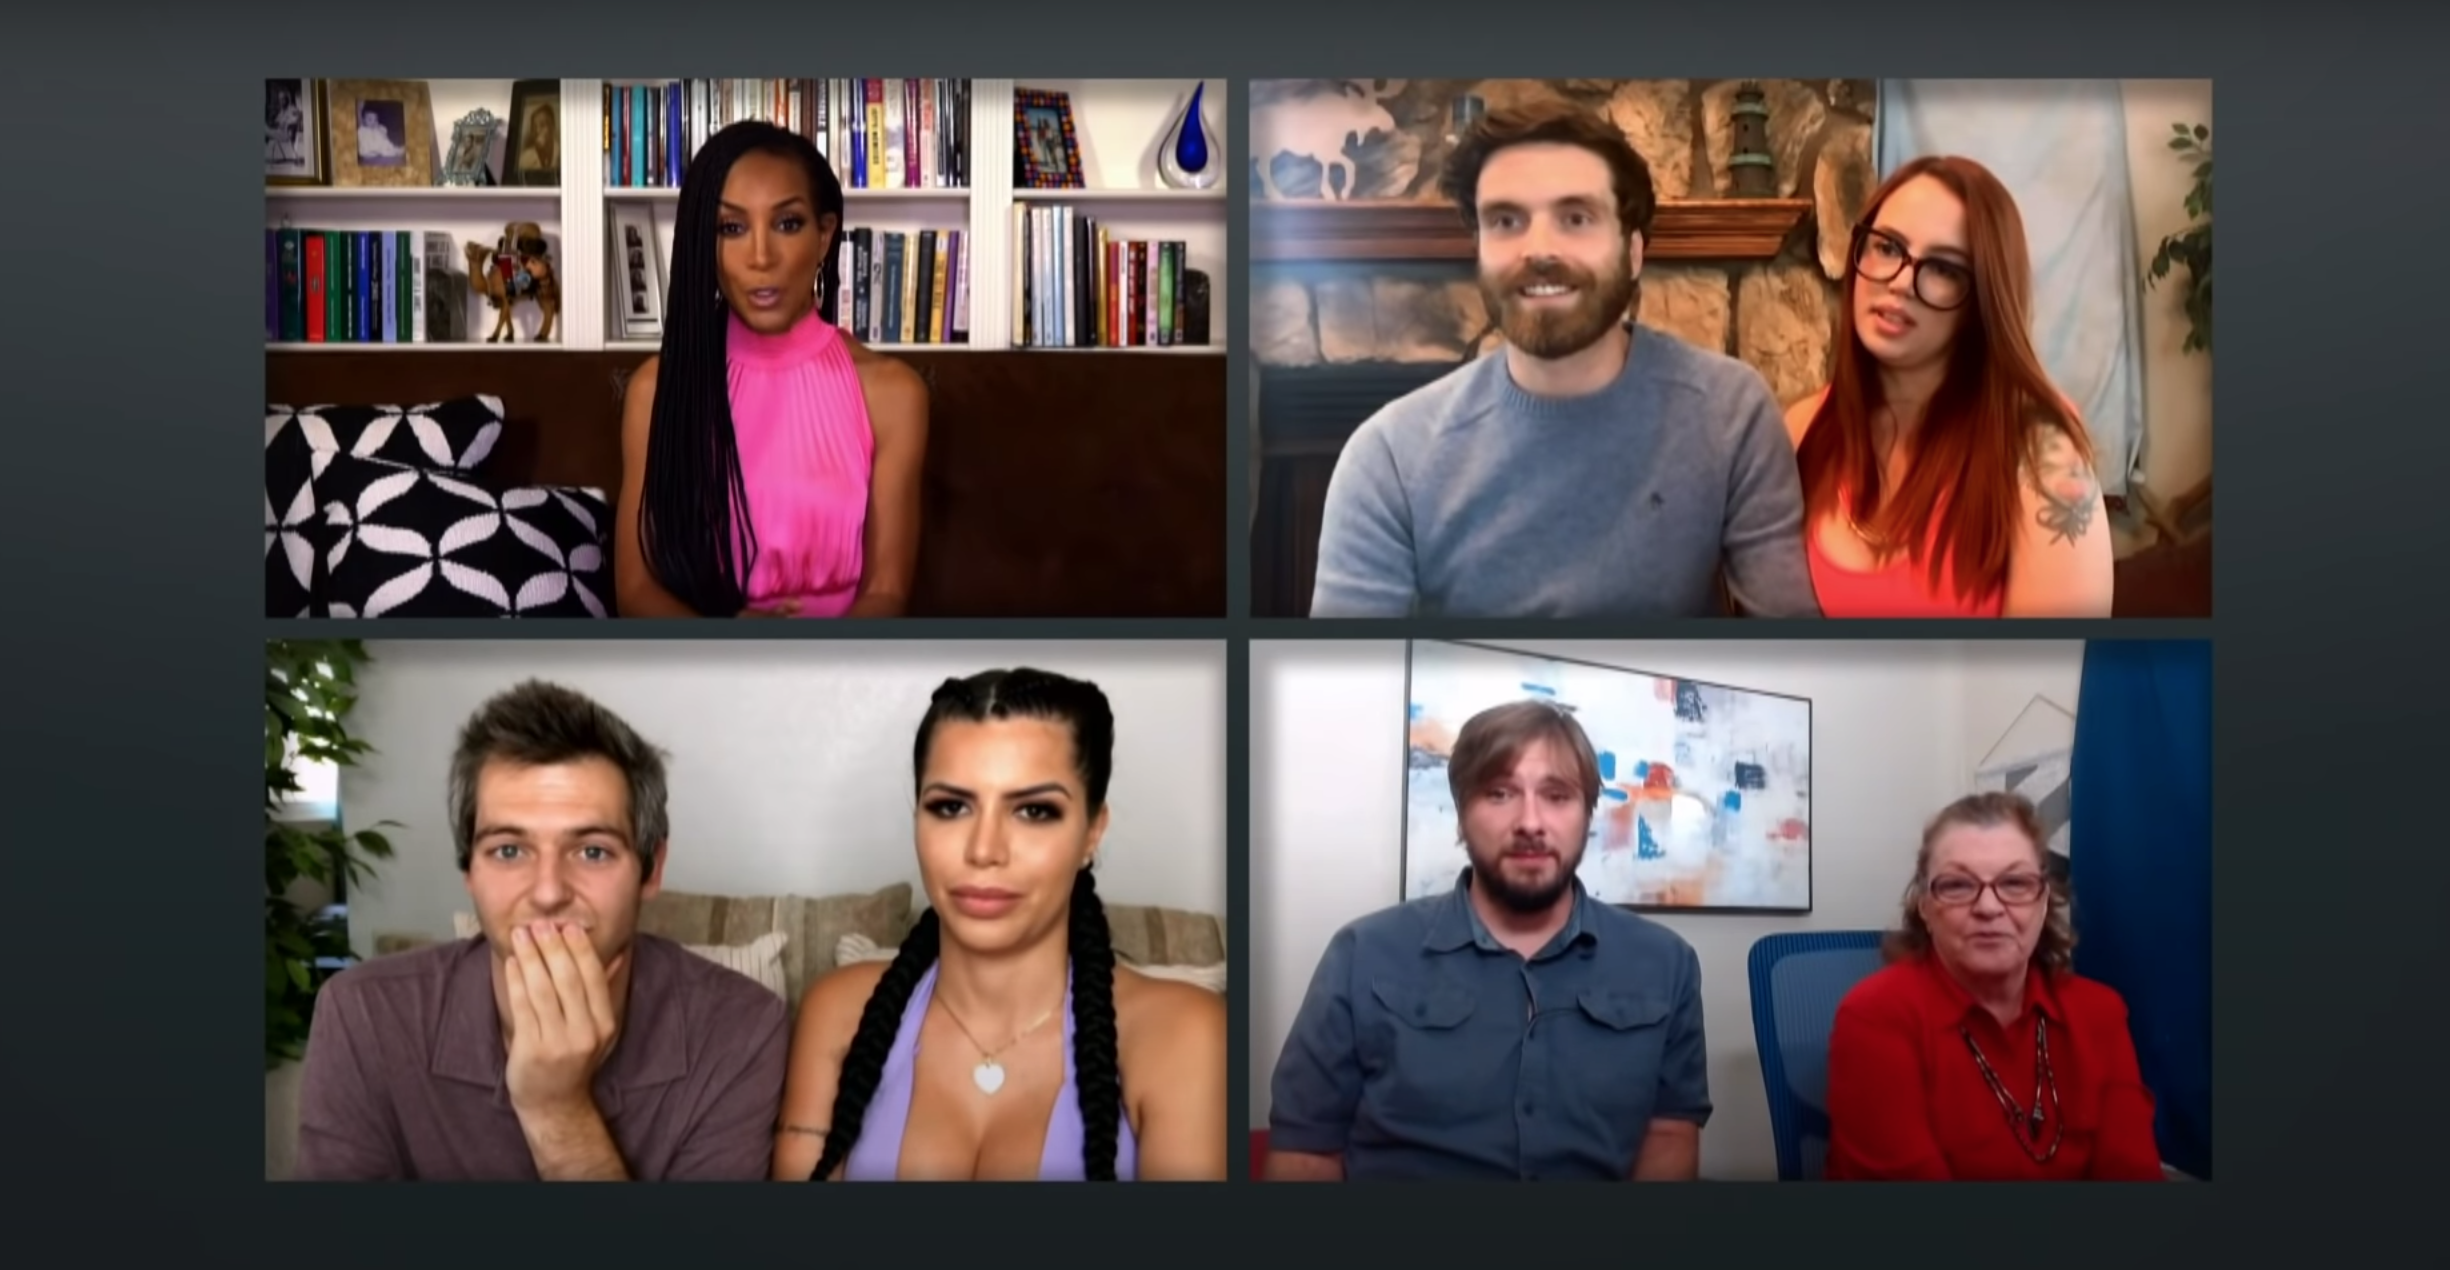 90 Day Fiancé: Happily Ever After? on TLC (2020)